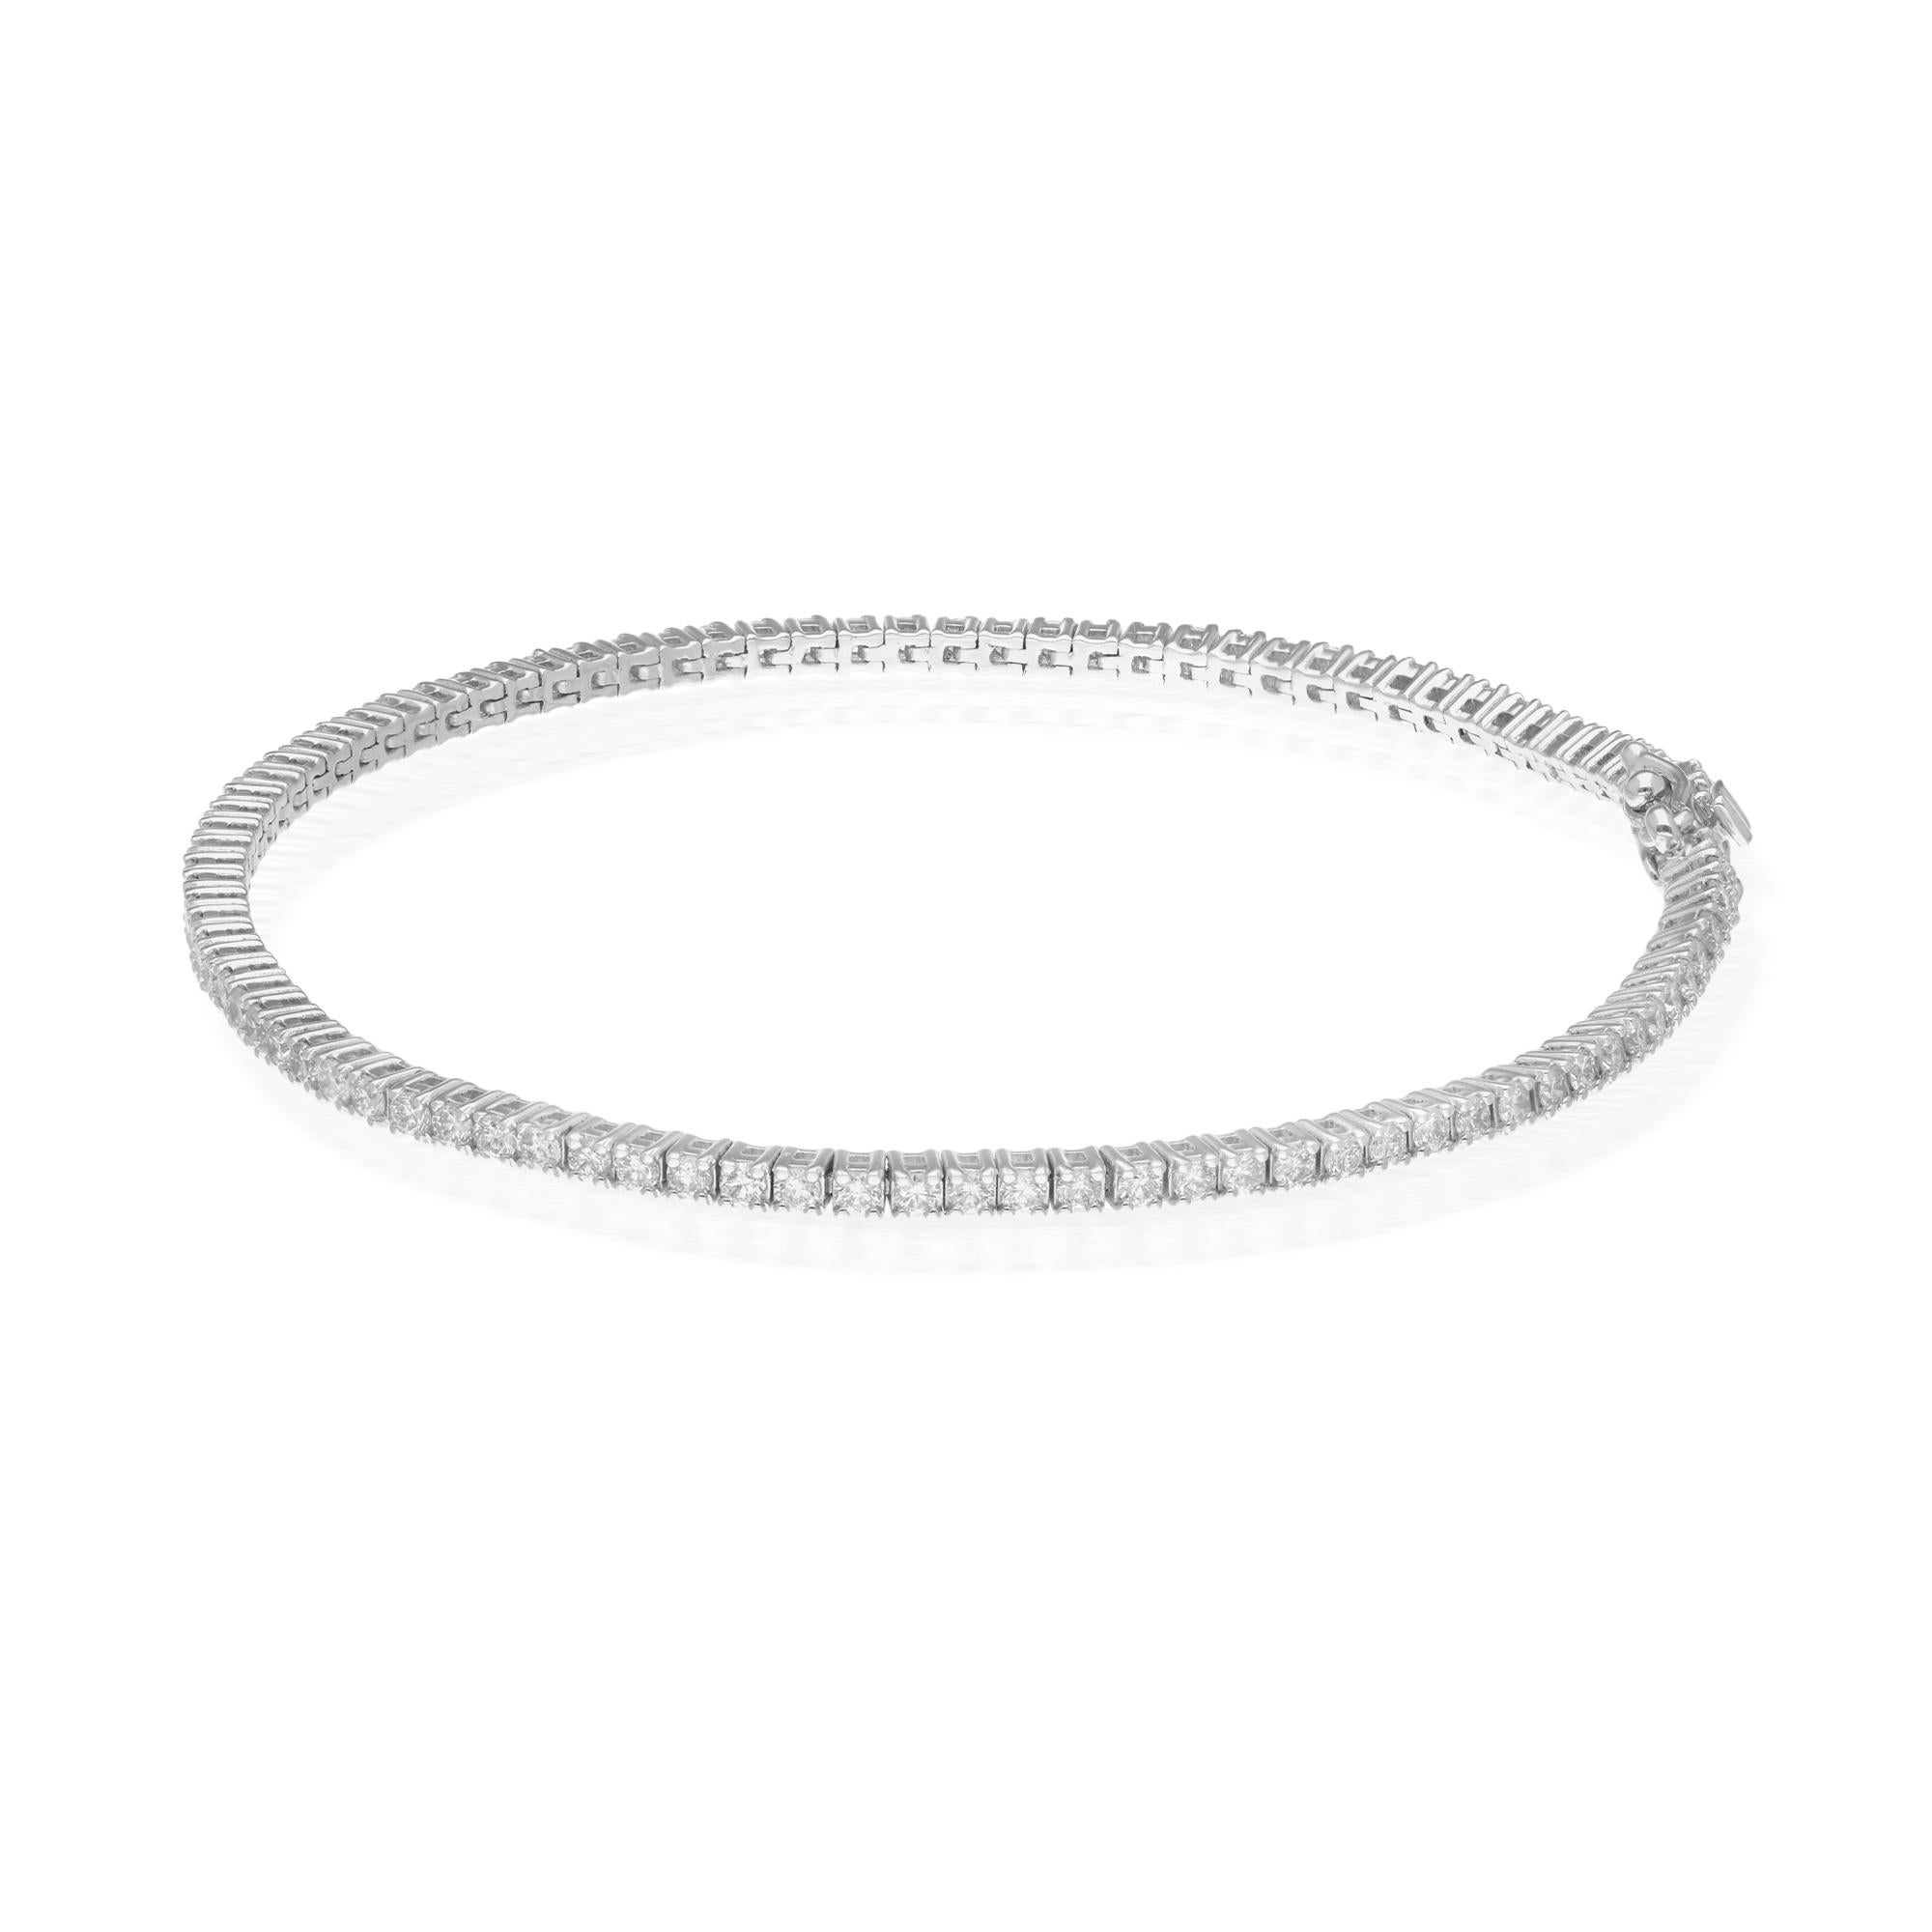 Each dazzling diamond is carefully selected for its superior quality, boasting SI clarity and a lustrous HI color grade, ensuring brilliance and sparkle that captivates with every movement. The diamonds are expertly set in a classic tennis bracelet